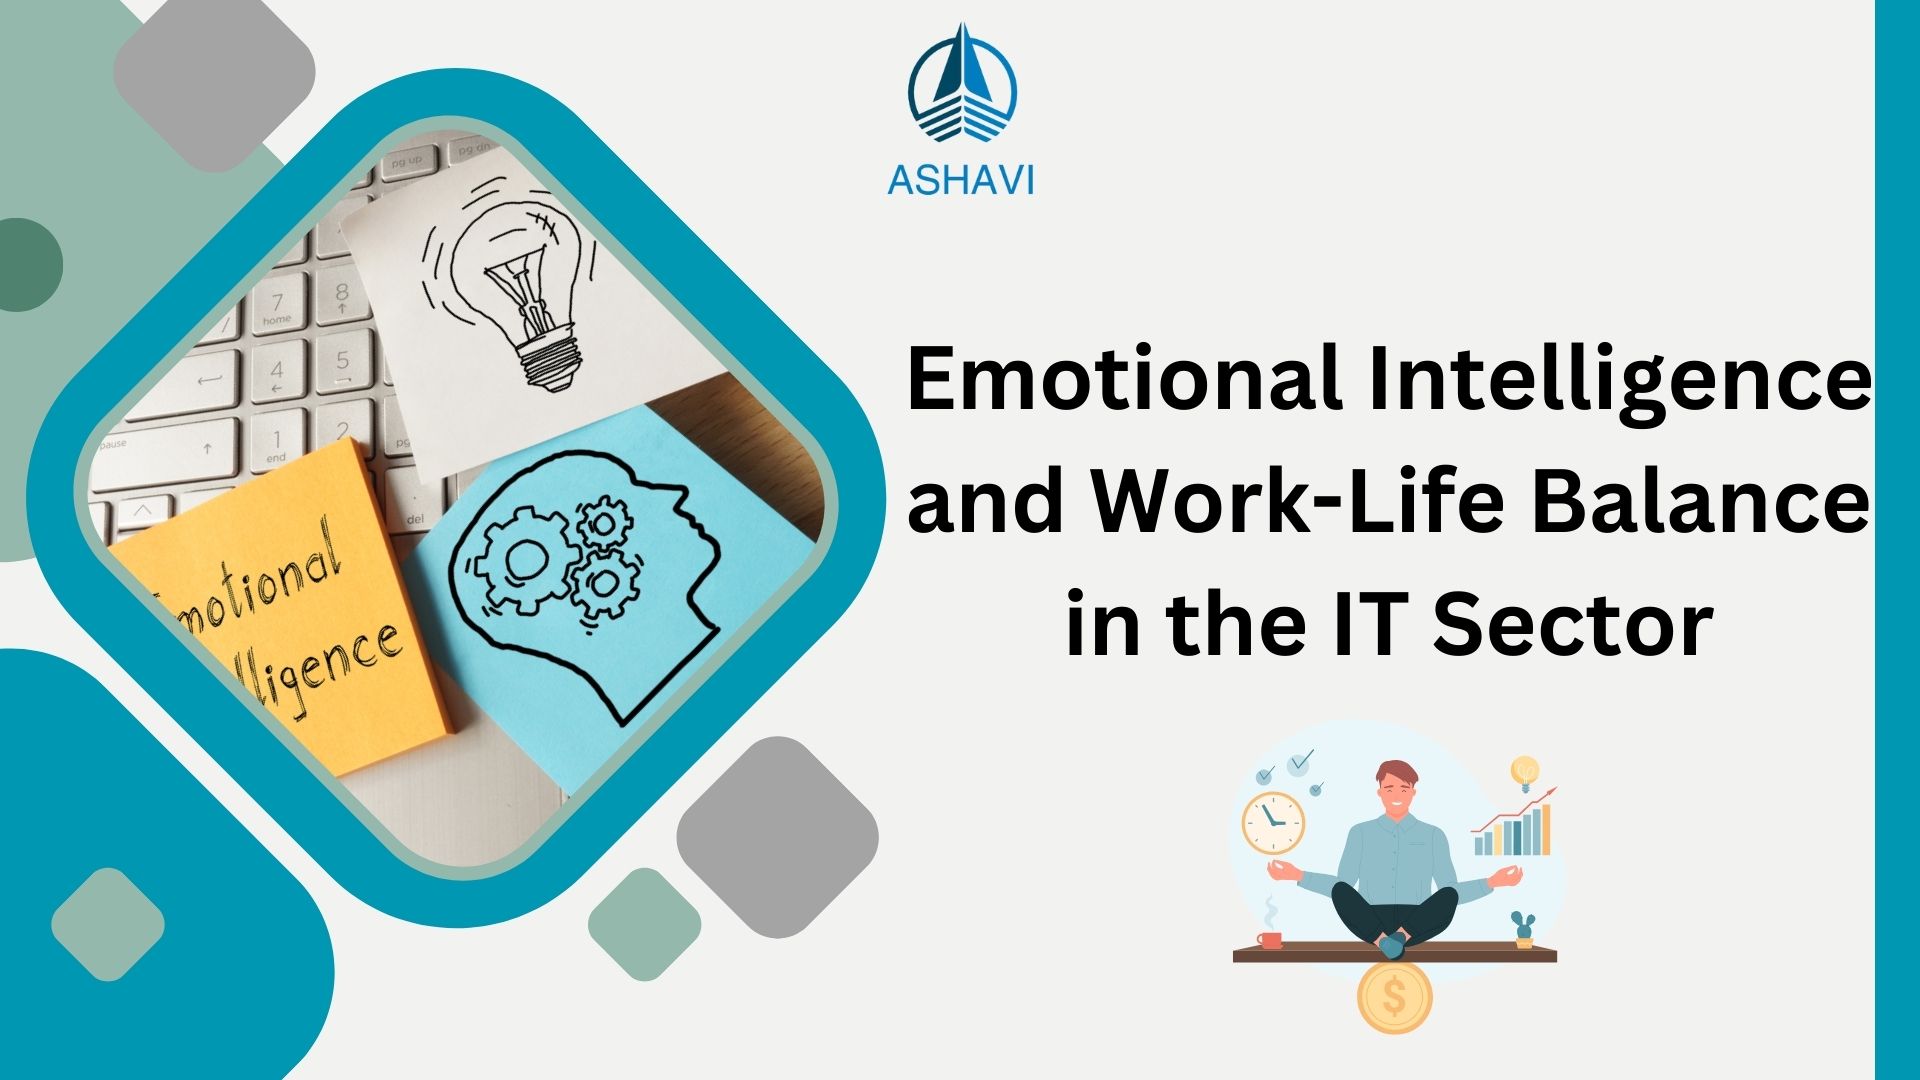 Emotional Intelligence and Work-Life Balance in the IT Sector